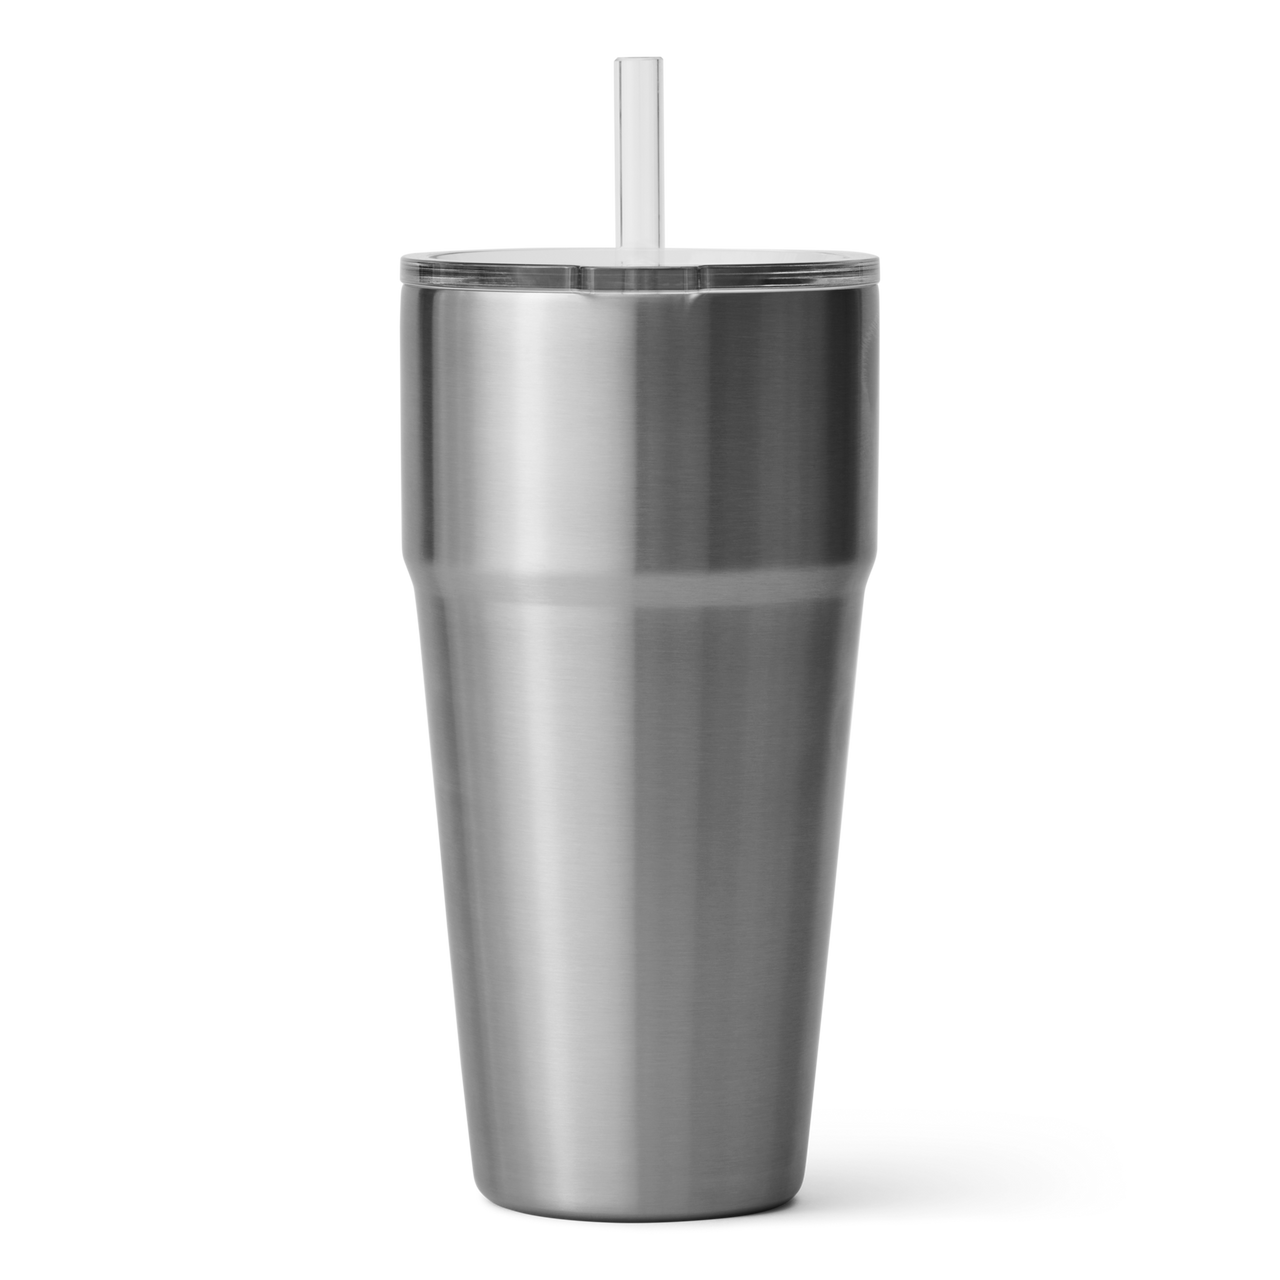 https://cdn11.bigcommerce.com/s-kk2jd0cxqh/images/stencil/1280x1280/products/15873/20775/yeti-rambler-26-oz-straw-cup-stainless-steel__90666.1688110234.png?c=1